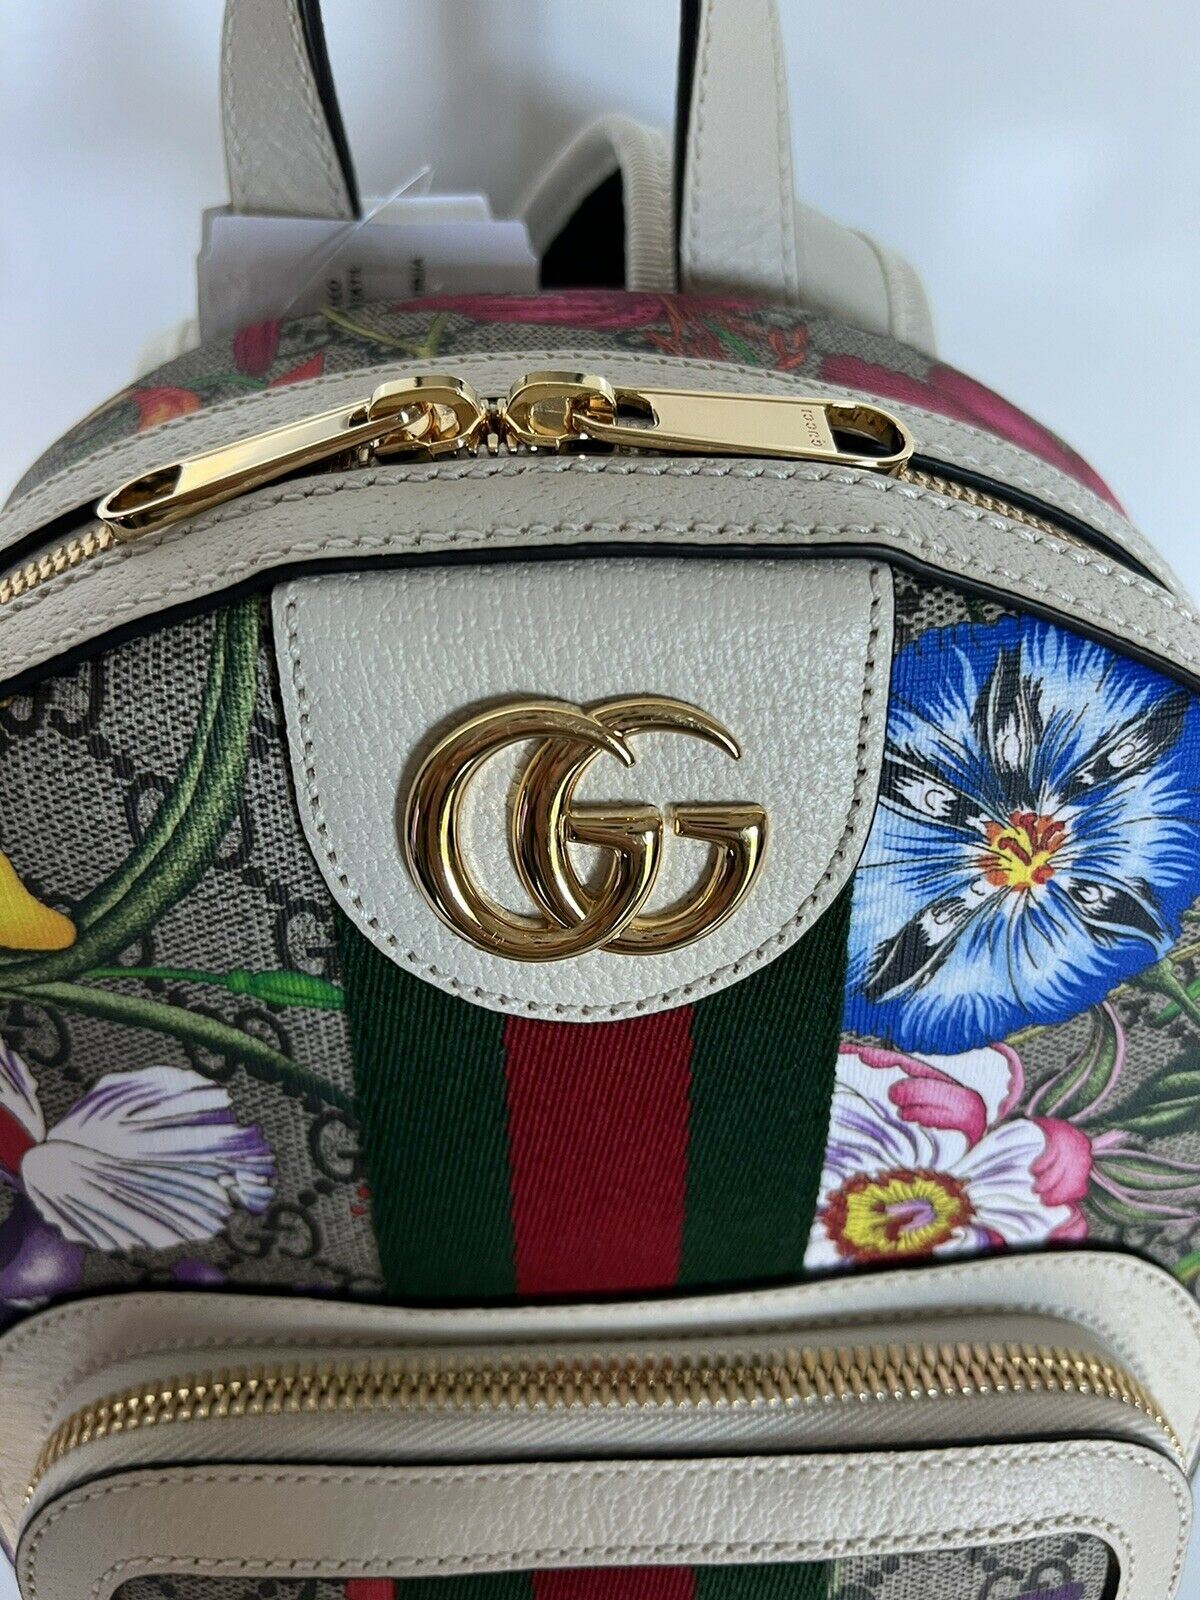 NEW GUCCI GG Supreme Monogram Flora Web Ophidia Medium Day Backpack 547965 Italy